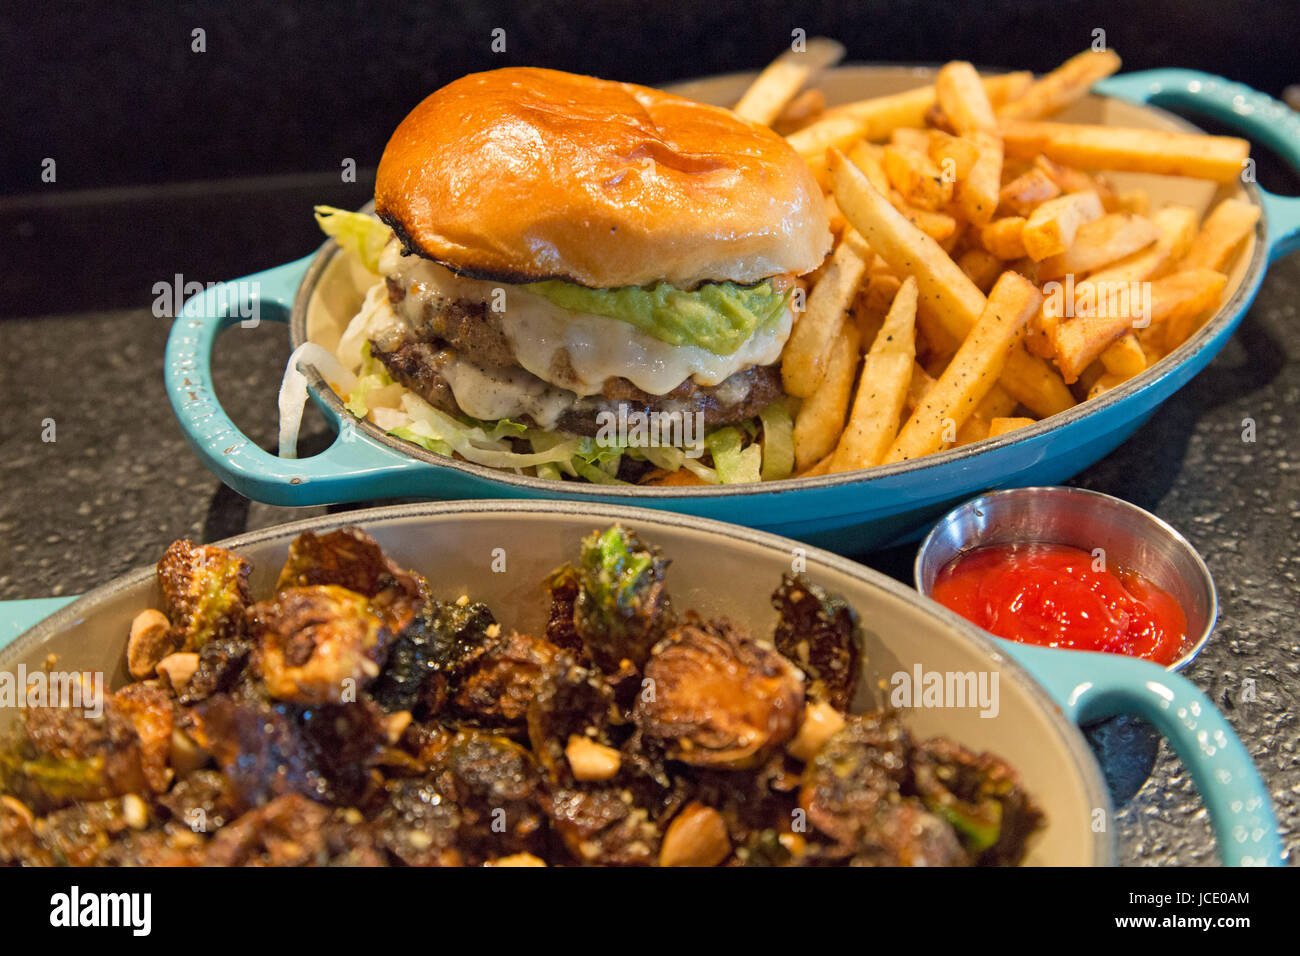 A cheese burger served with fries in Calgary, Canada. The dish is served with seared brussel sprouts with almonds and lime juice. Stock Photo